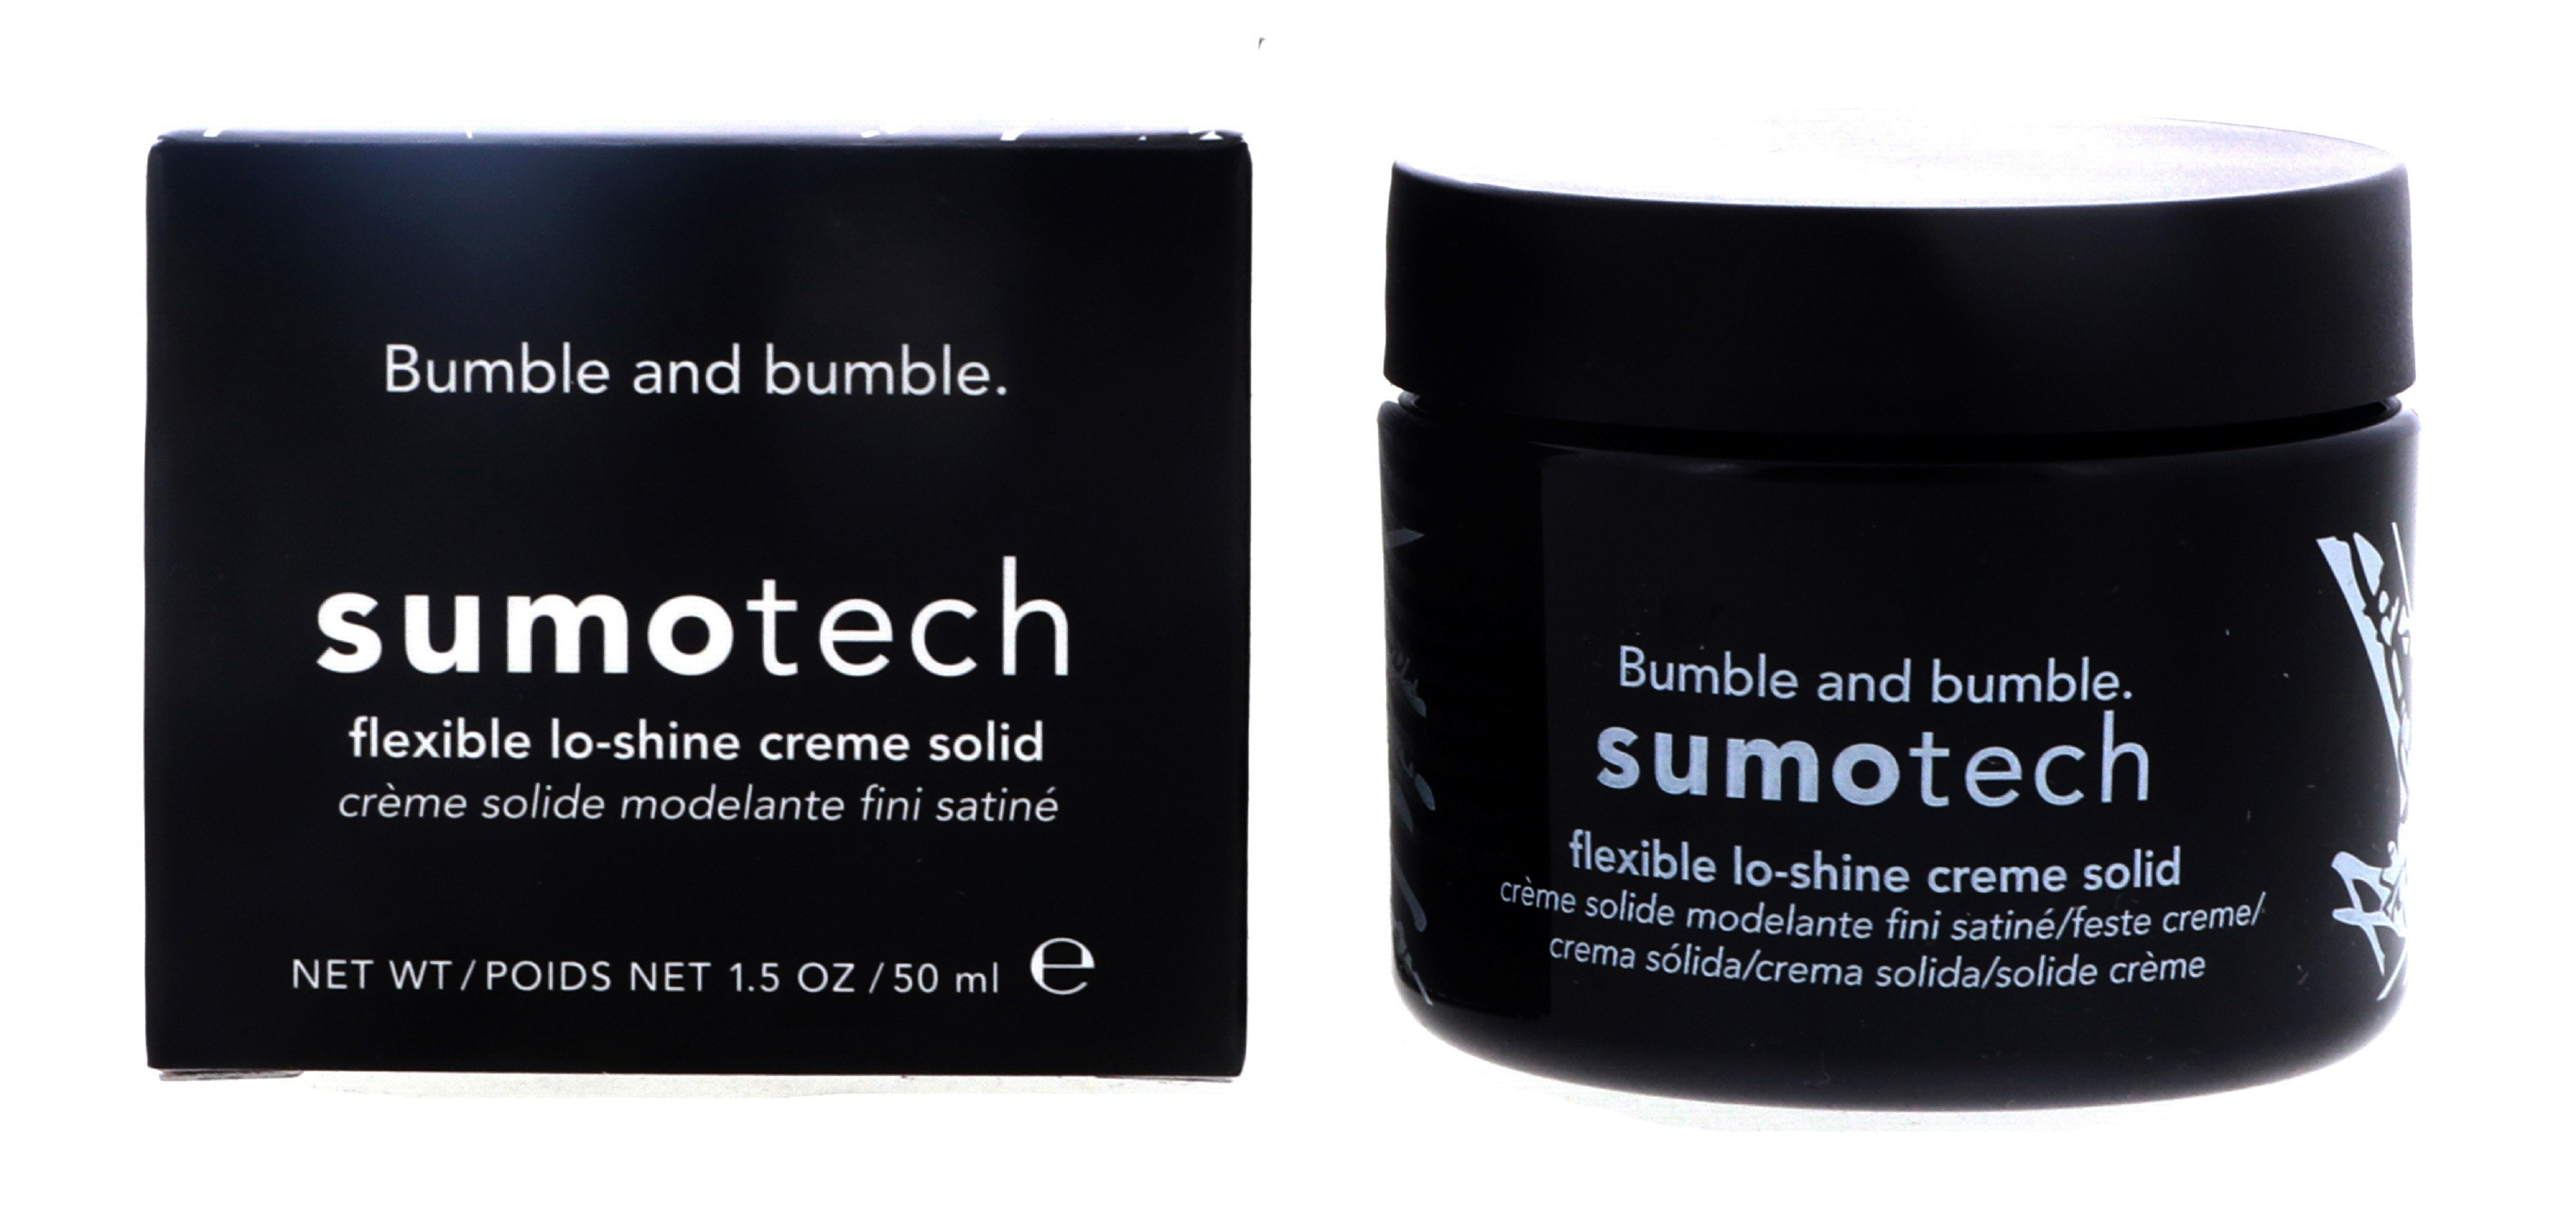 Bumble and Bumble Sumo Tech Creme, 1.5 oz 2 Pack - image 4 of 4